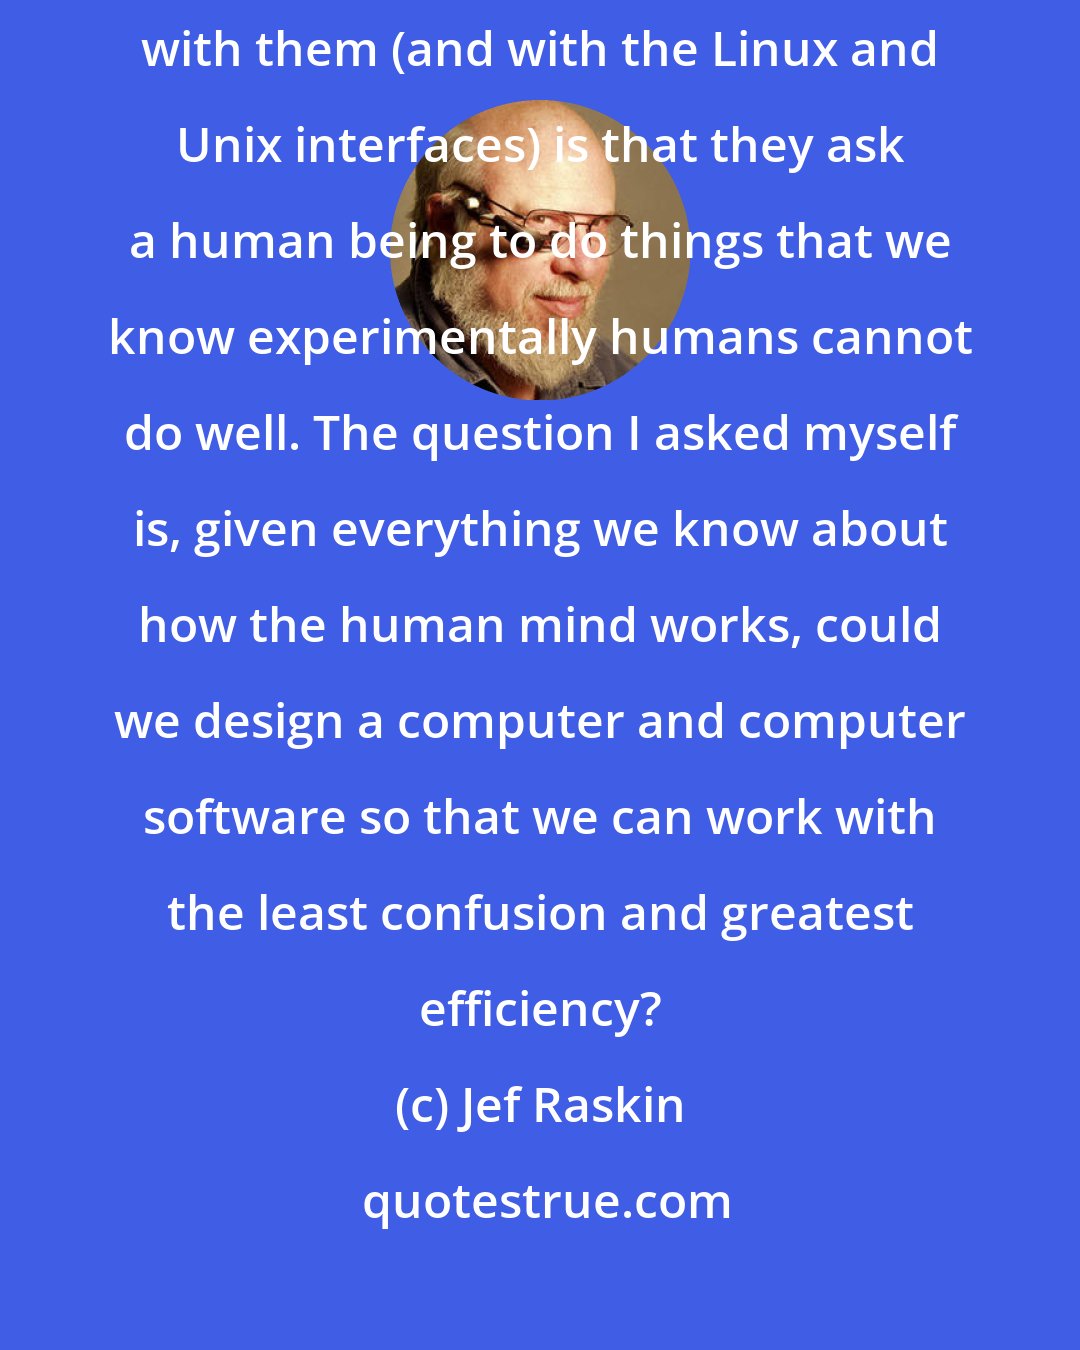 Jef Raskin: I am confident that we can do better than GUIs because the basic problem with them (and with the Linux and Unix interfaces) is that they ask a human being to do things that we know experimentally humans cannot do well. The question I asked myself is, given everything we know about how the human mind works, could we design a computer and computer software so that we can work with the least confusion and greatest efficiency?